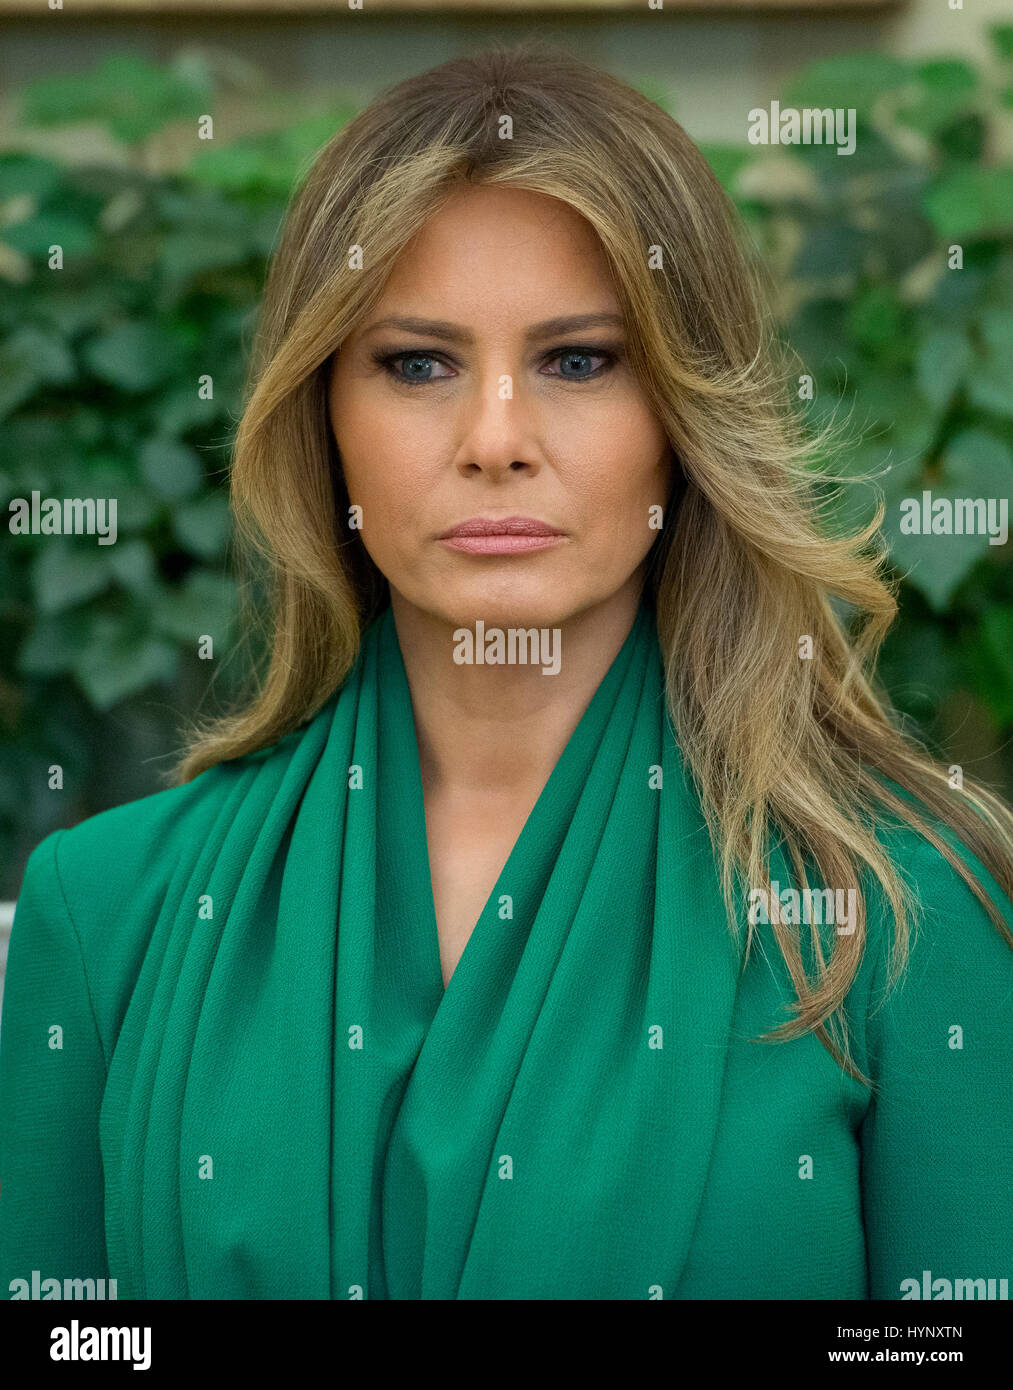 Washington, Us. 05th Apr, 2017. First lady Melania Trump stands as United States President Donald J. Trump meets King Abdullah II of Jordan in the Oval Office of the White House in Washington, DC on Wednesday, April 5, 2017. Credit: Ron Sachs/Pool via CNP - NO WIRE SERVICE - Photo: Ron Sachs/Consolidated News Photos/Ron Sachs - Pool via CNP/dpa/Alamy Live News Stock Photo